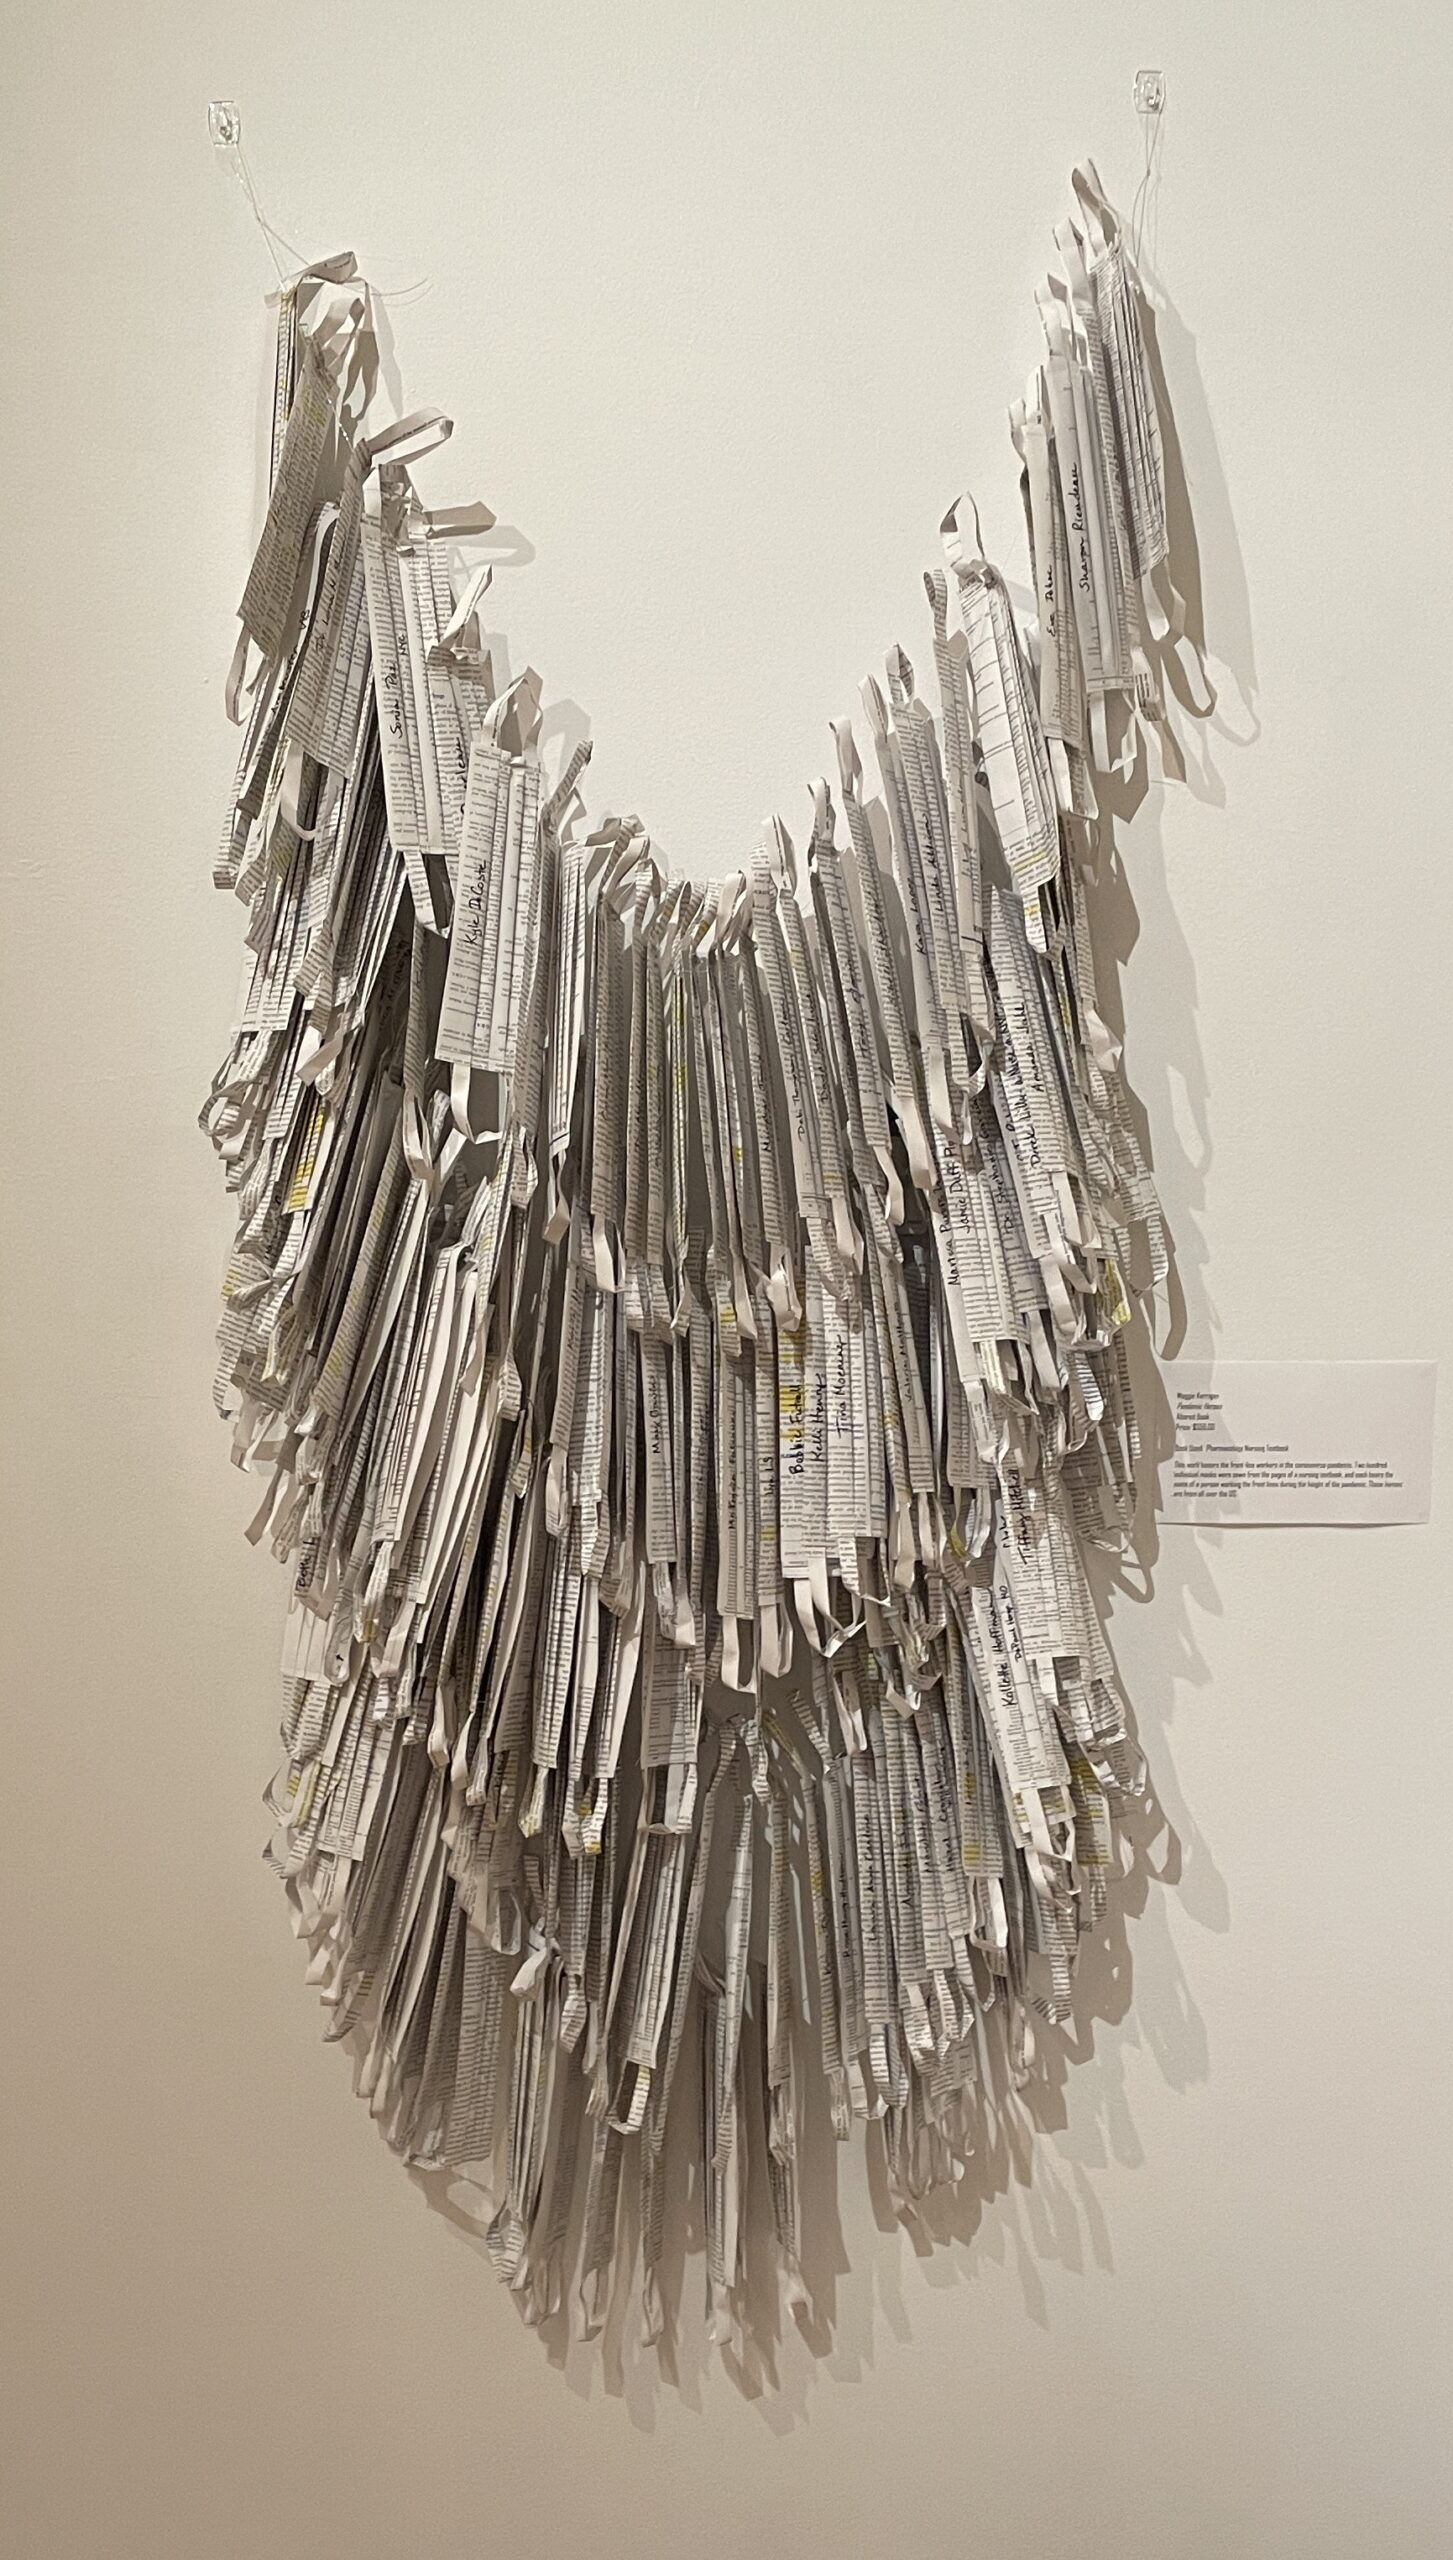 Pandemic Heroes is an artwork by Maggie Kerrigan that consists of 200 paper face masks made from a nursing textbook.